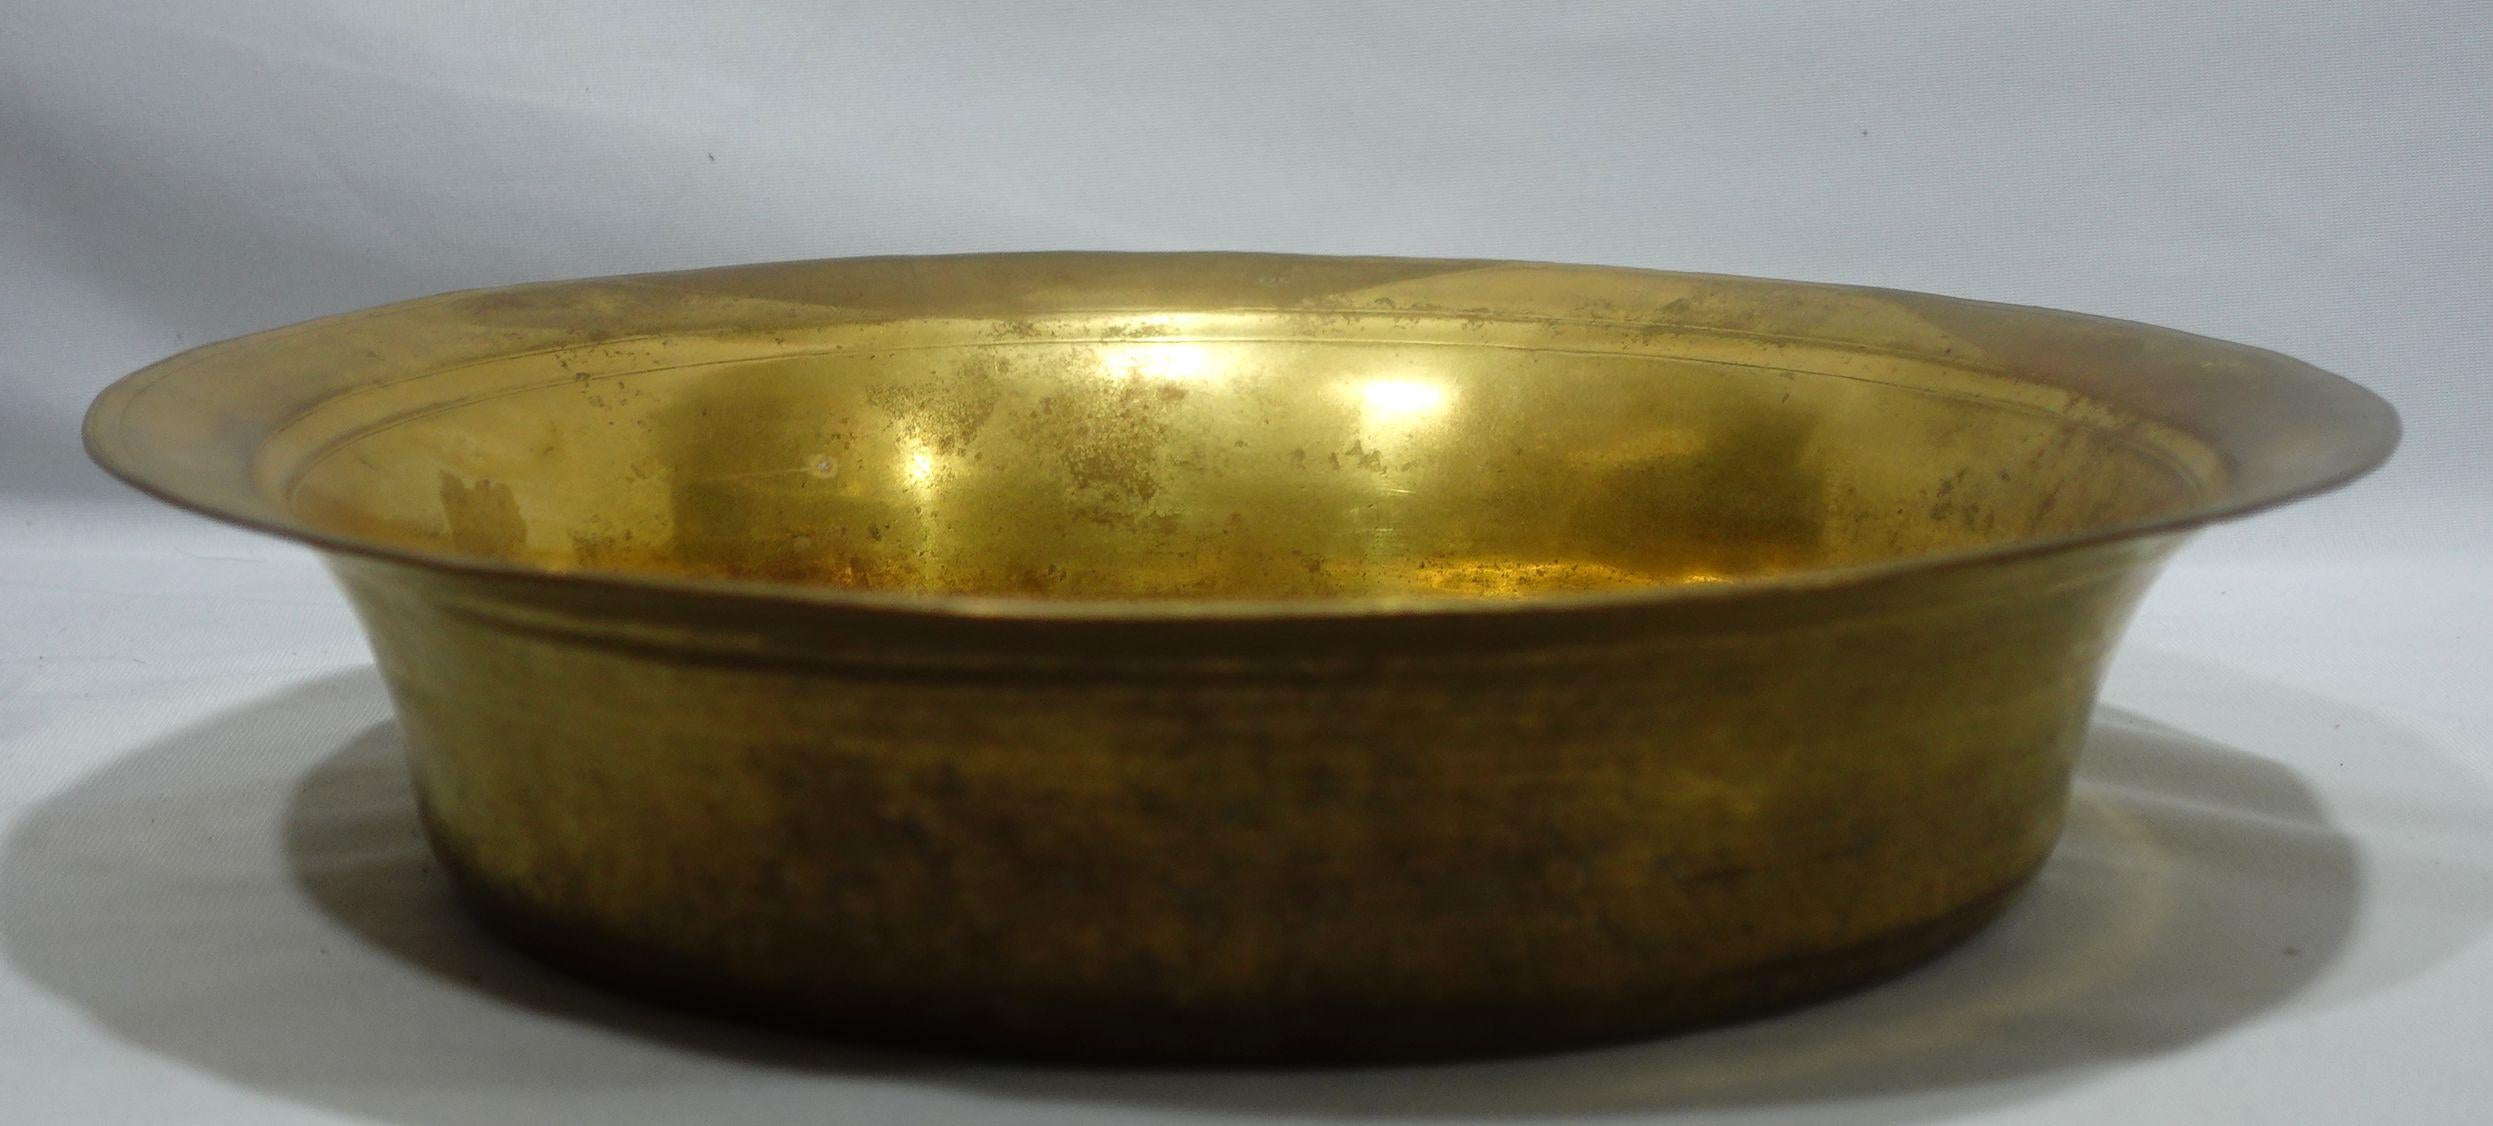 This is a large and old brass basin, thick and heavy gauge absolutely 100% hand-hammered brass made from the 18th century in British. It is a scarce item and a lovely classical form.
